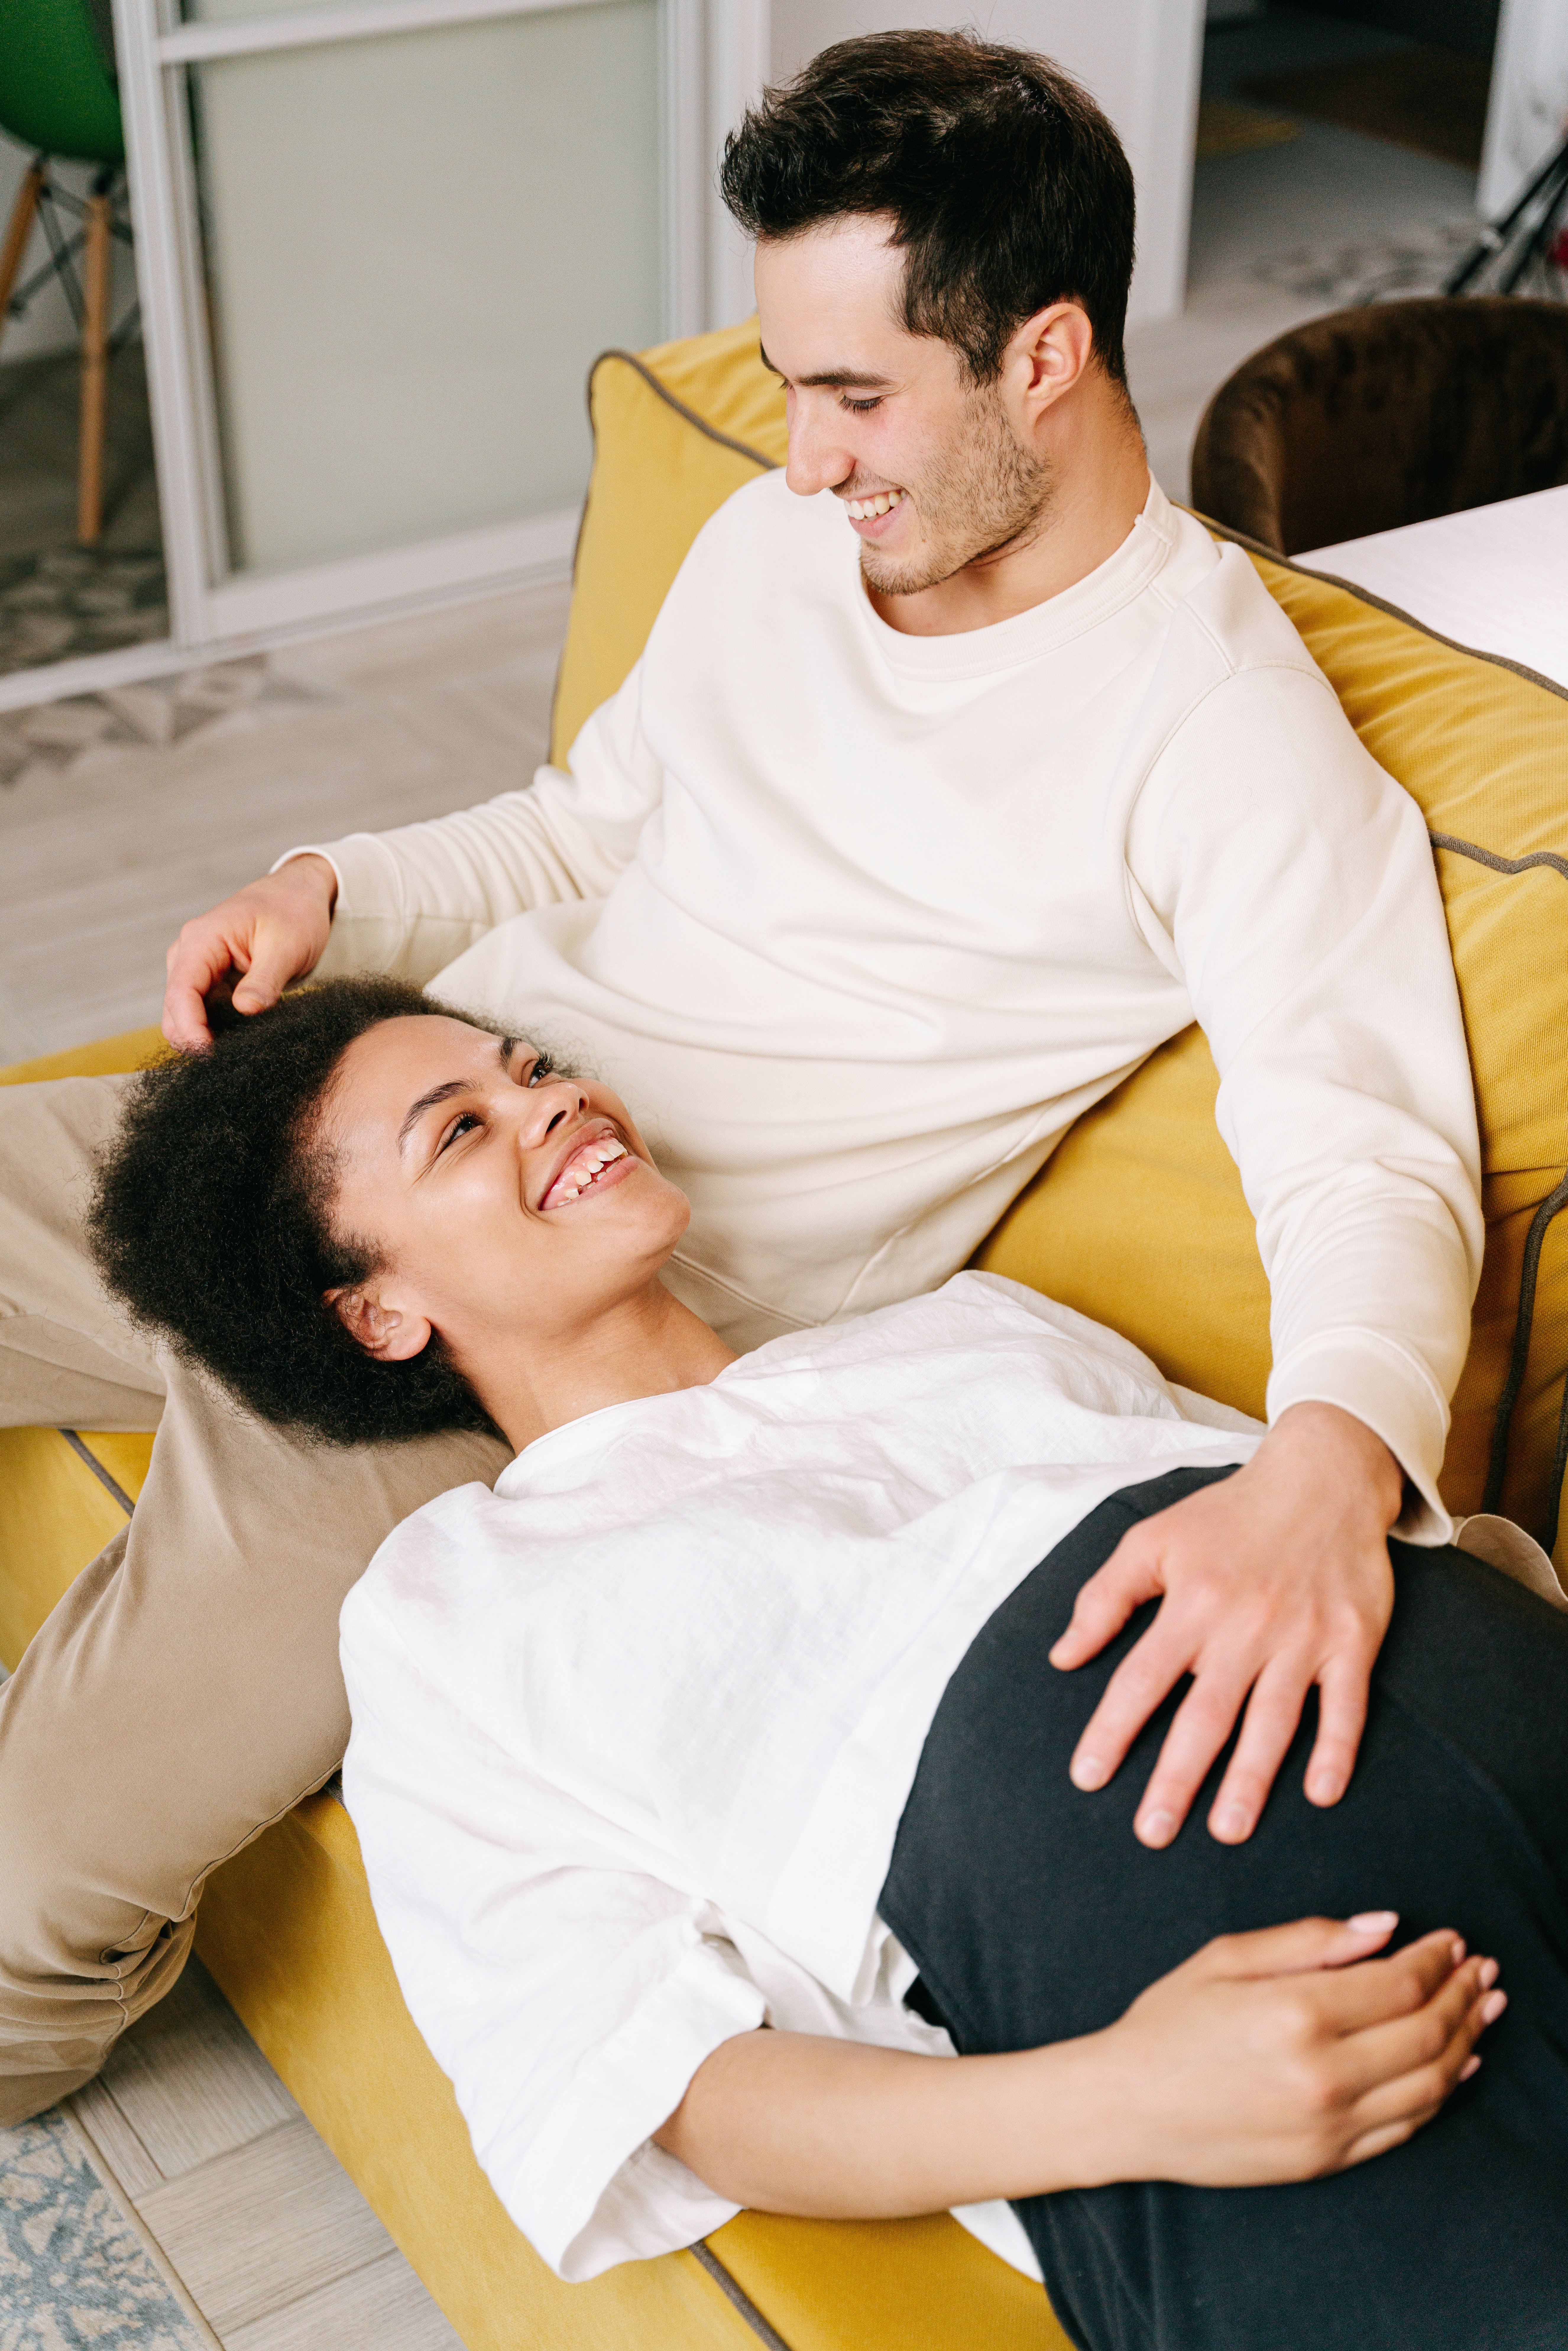 Pregnant person lying their head in a partner's lap on couch.